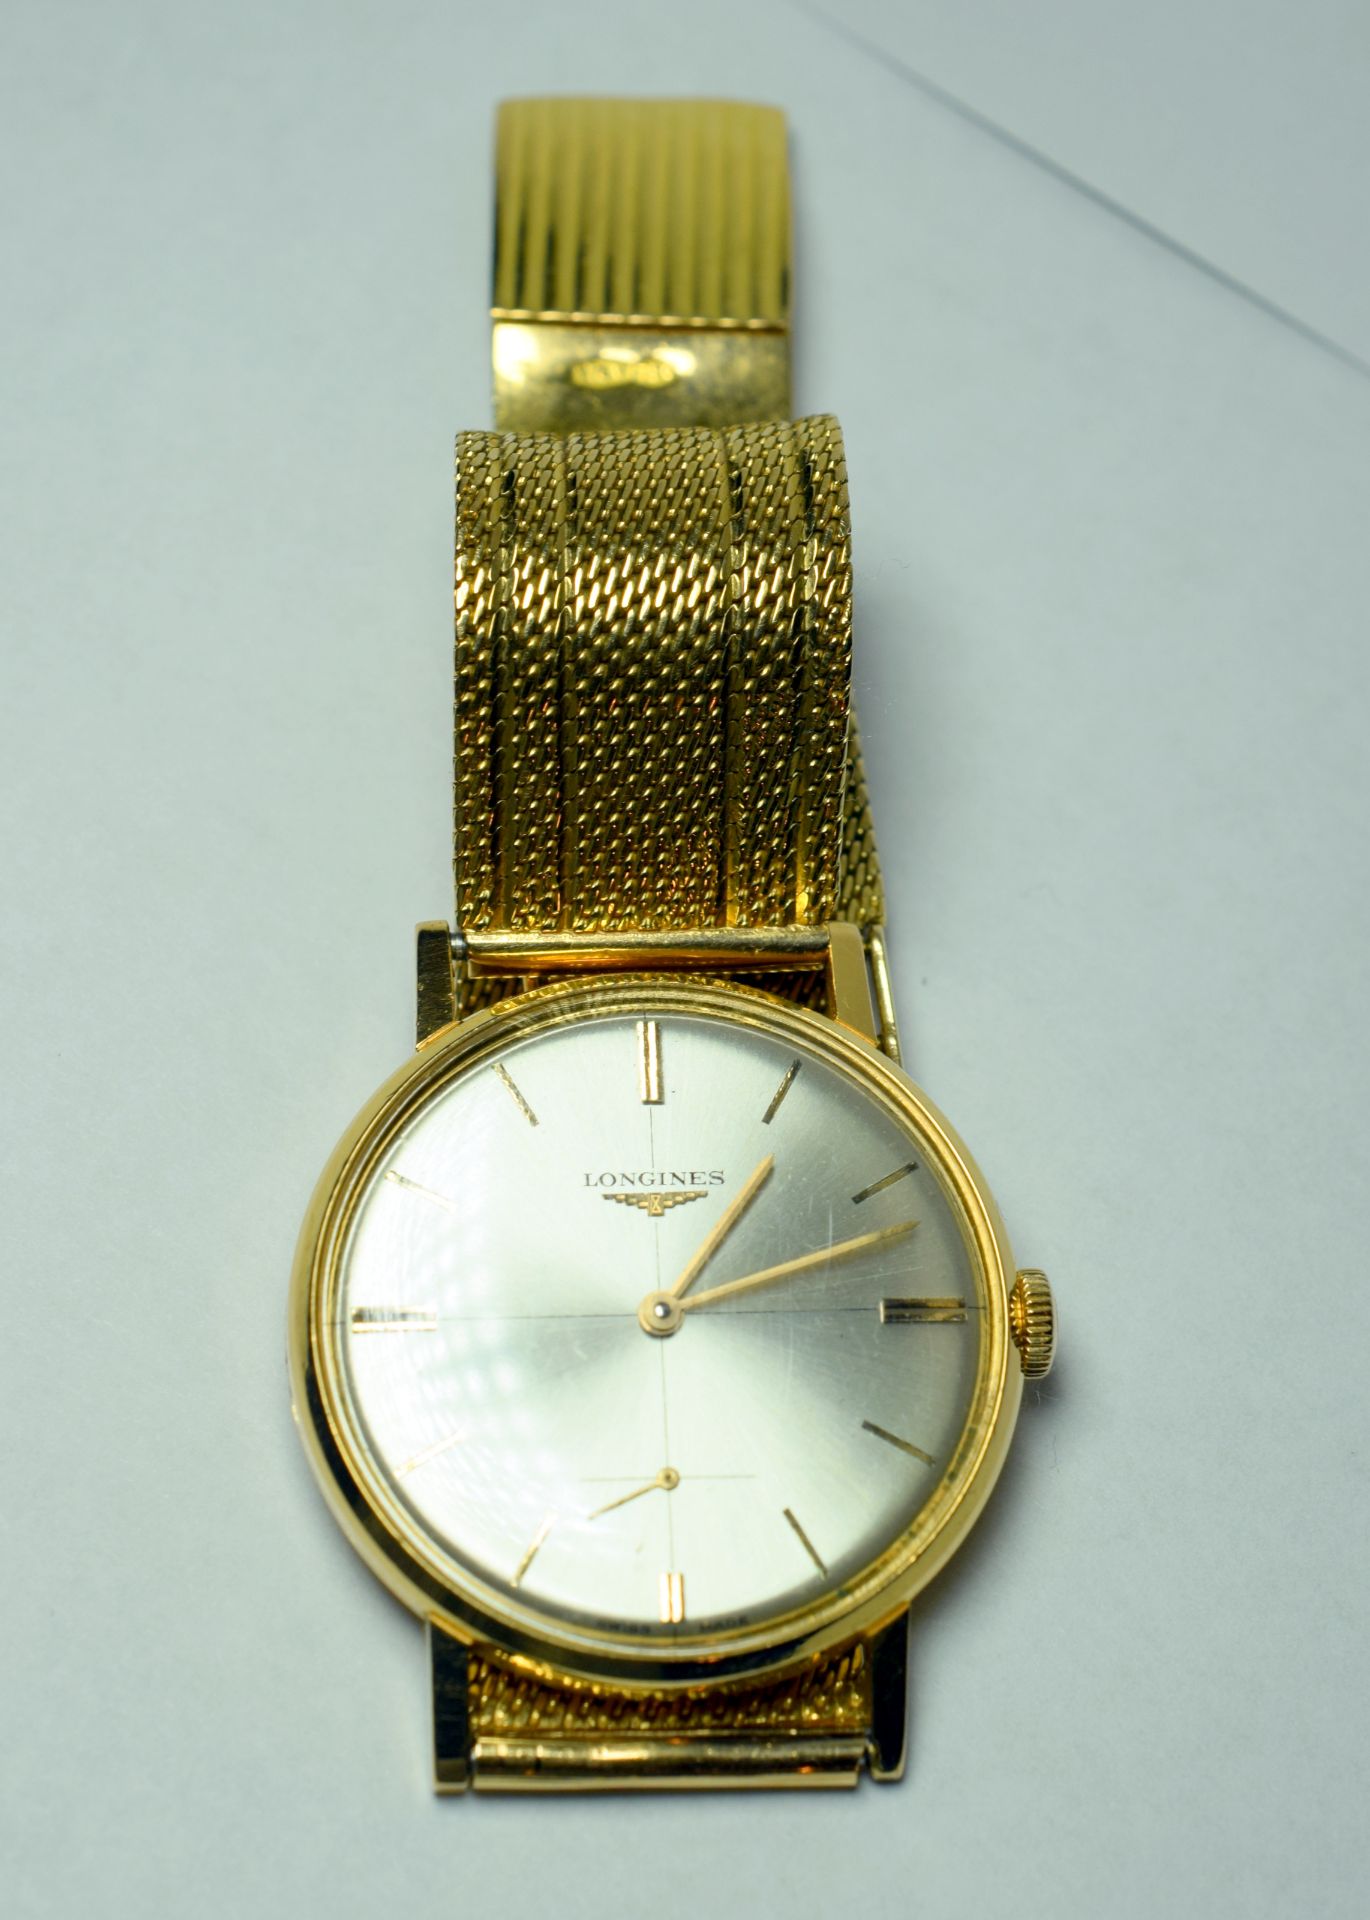 18ct Solid Gold Longines Gentleman's Watch On 18ct Gold Bracelet - Image 4 of 7